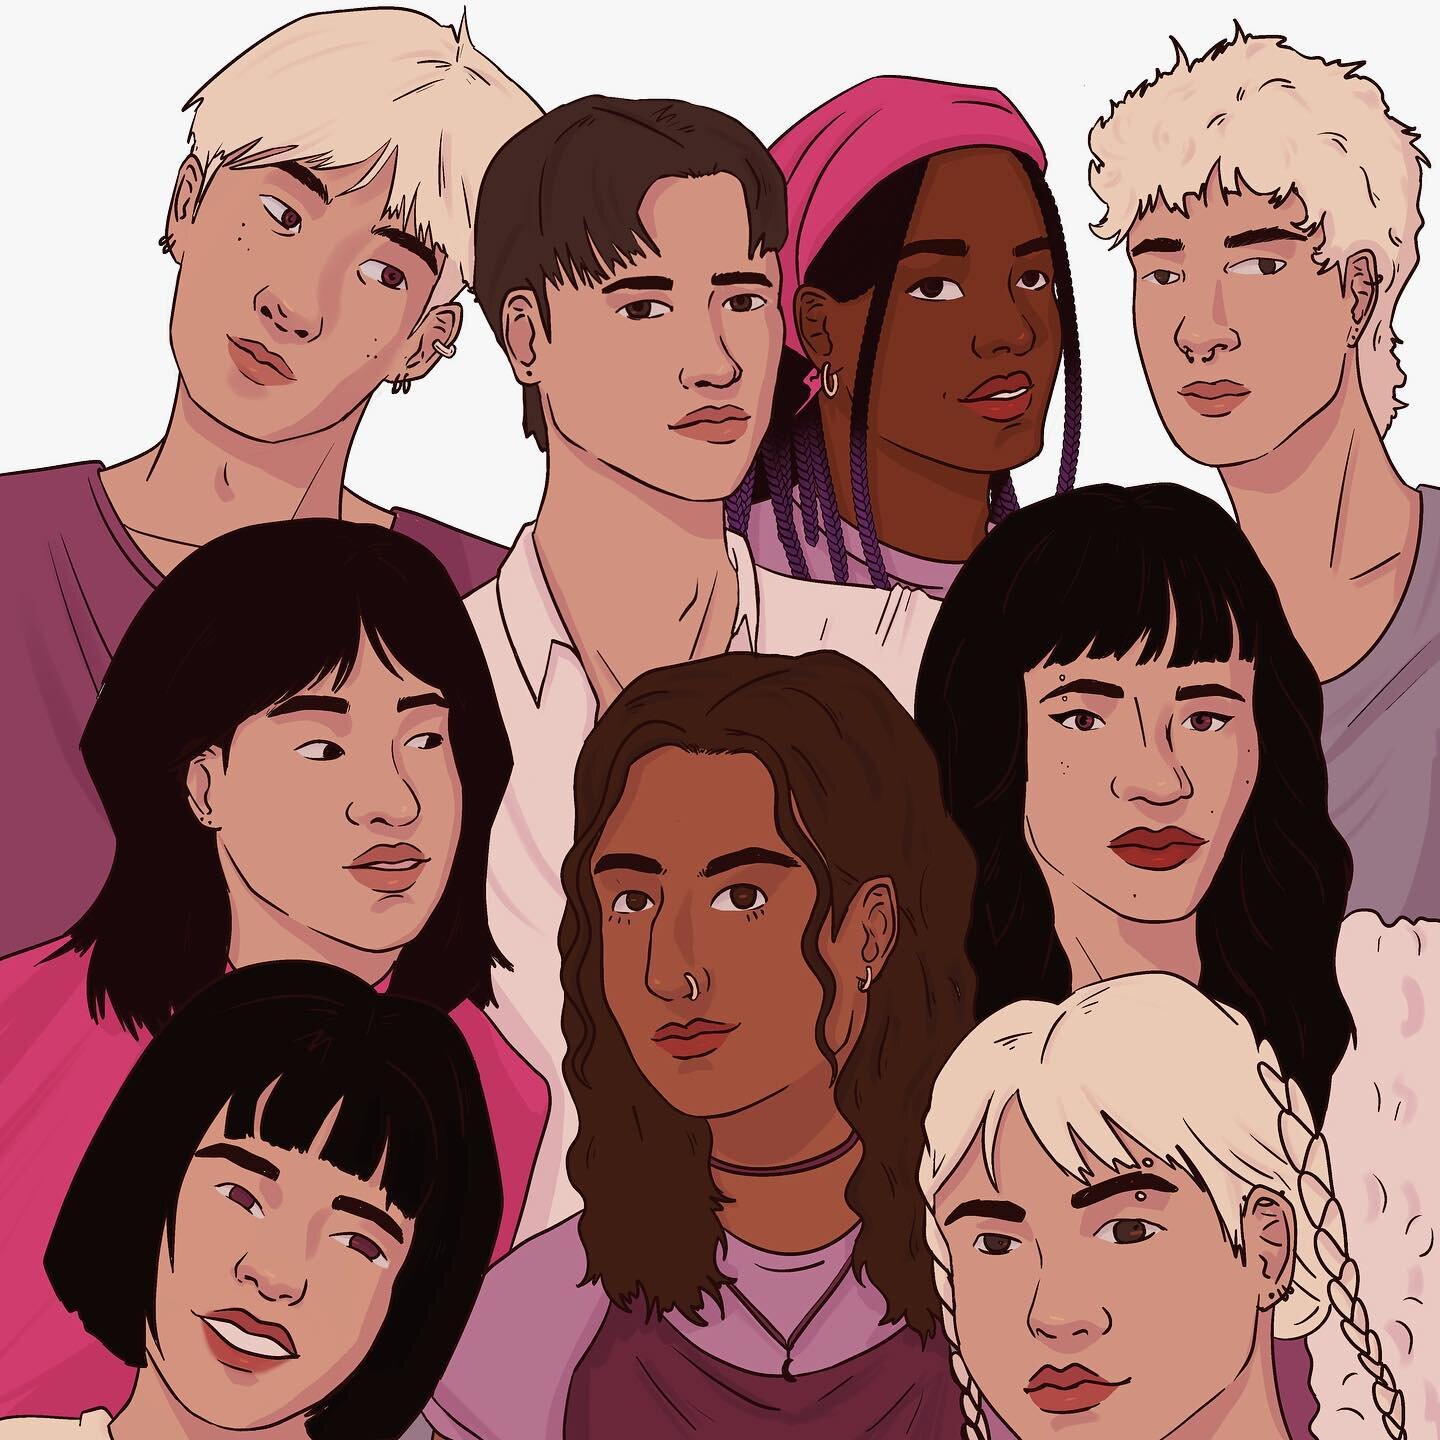 Happy One Year of &ldquo;Summer of Seoul&rdquo;!! 

I can&rsquo;t believe that it has already been a whole year since I released the first three episodes of my webcomic! 

Here are all the key characters of the comic 💜 From left to right: June, Dani